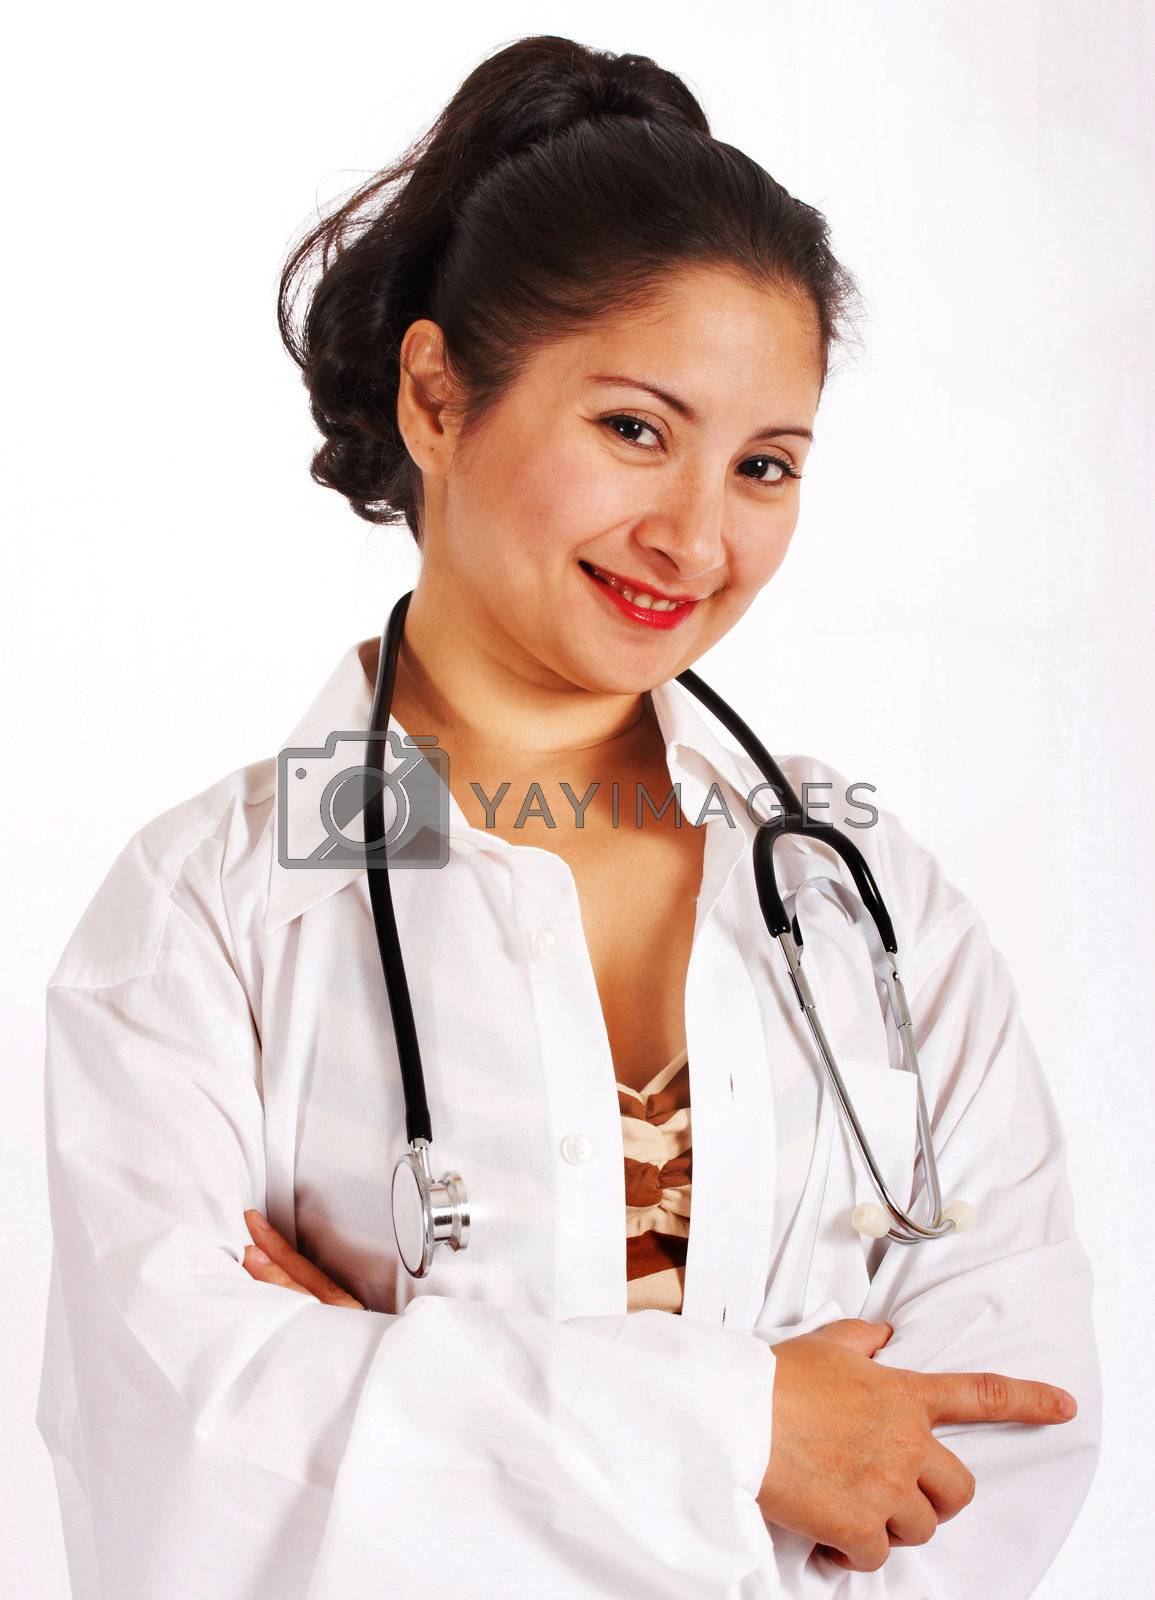 Smiling Doctor With Stethoscope Around Her Neck